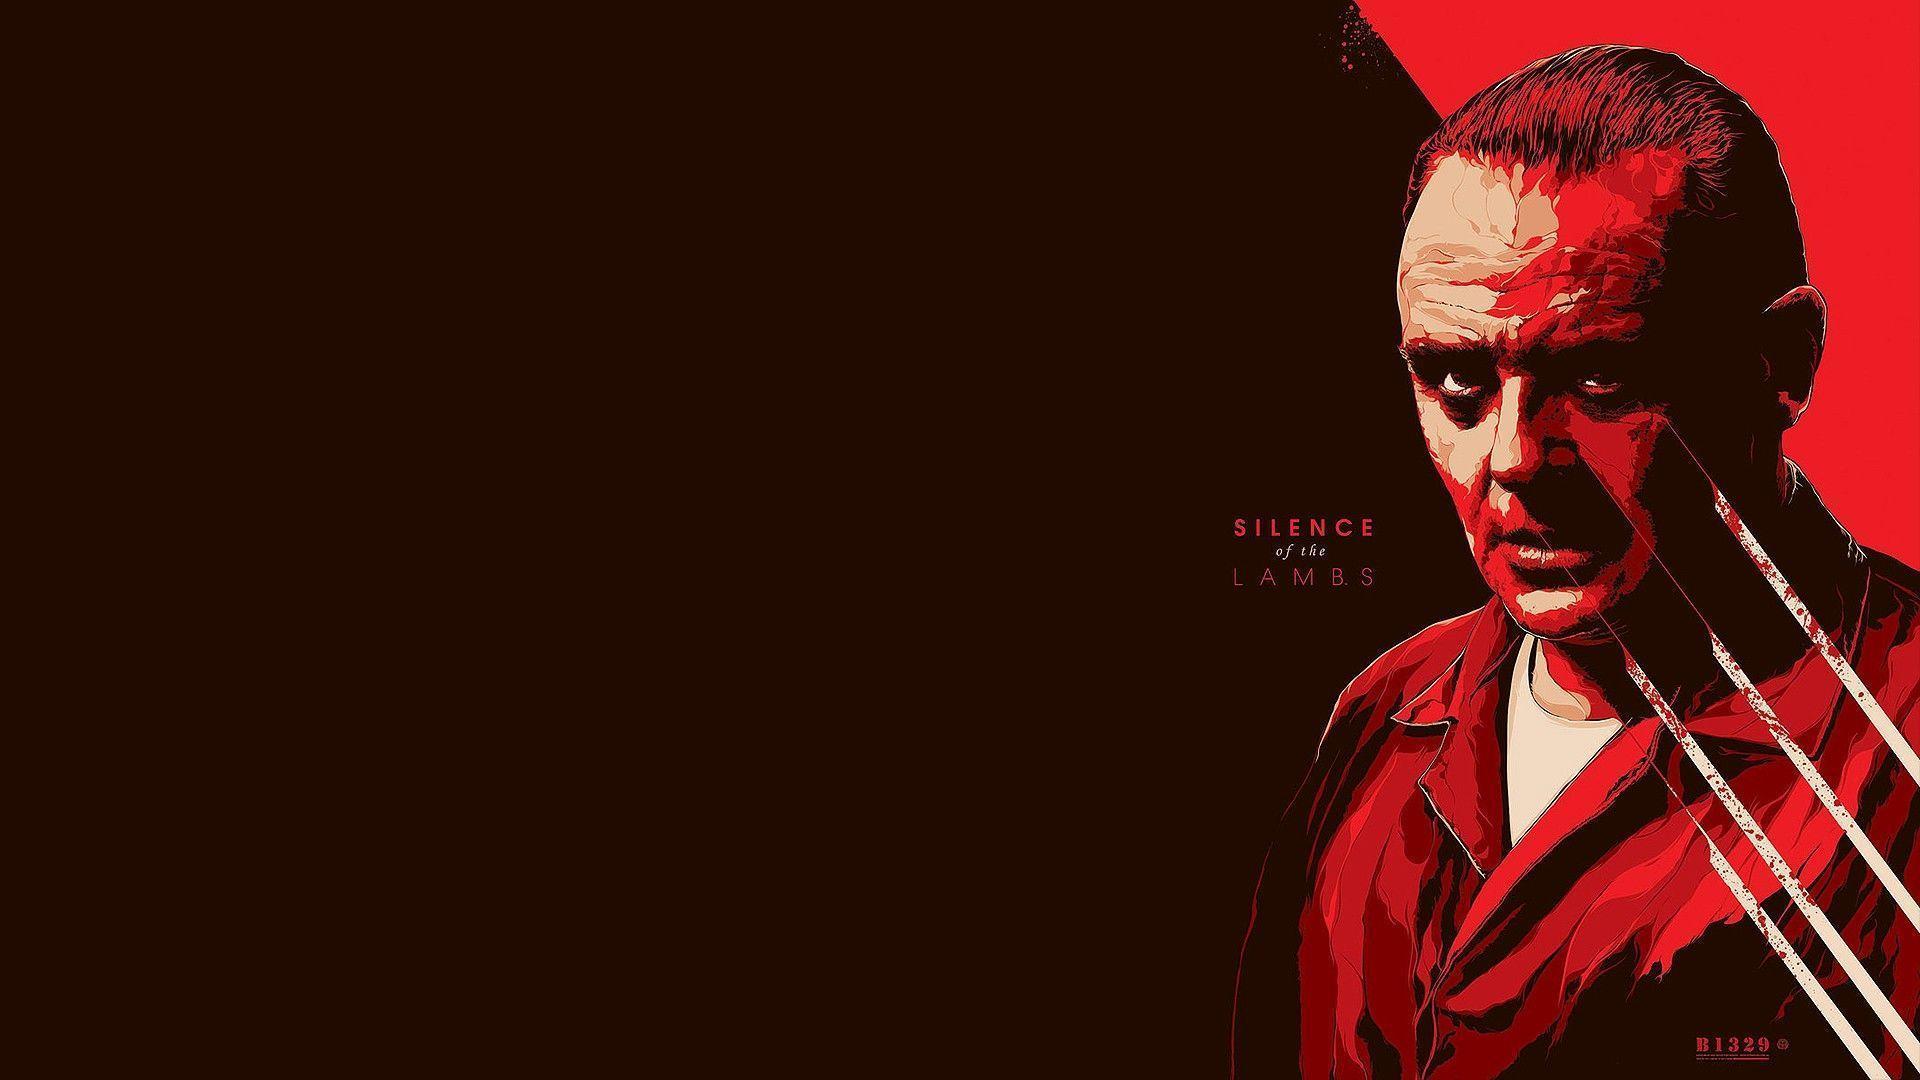 Silence Of The Lambs Wallpapers - Wallpaper Cave